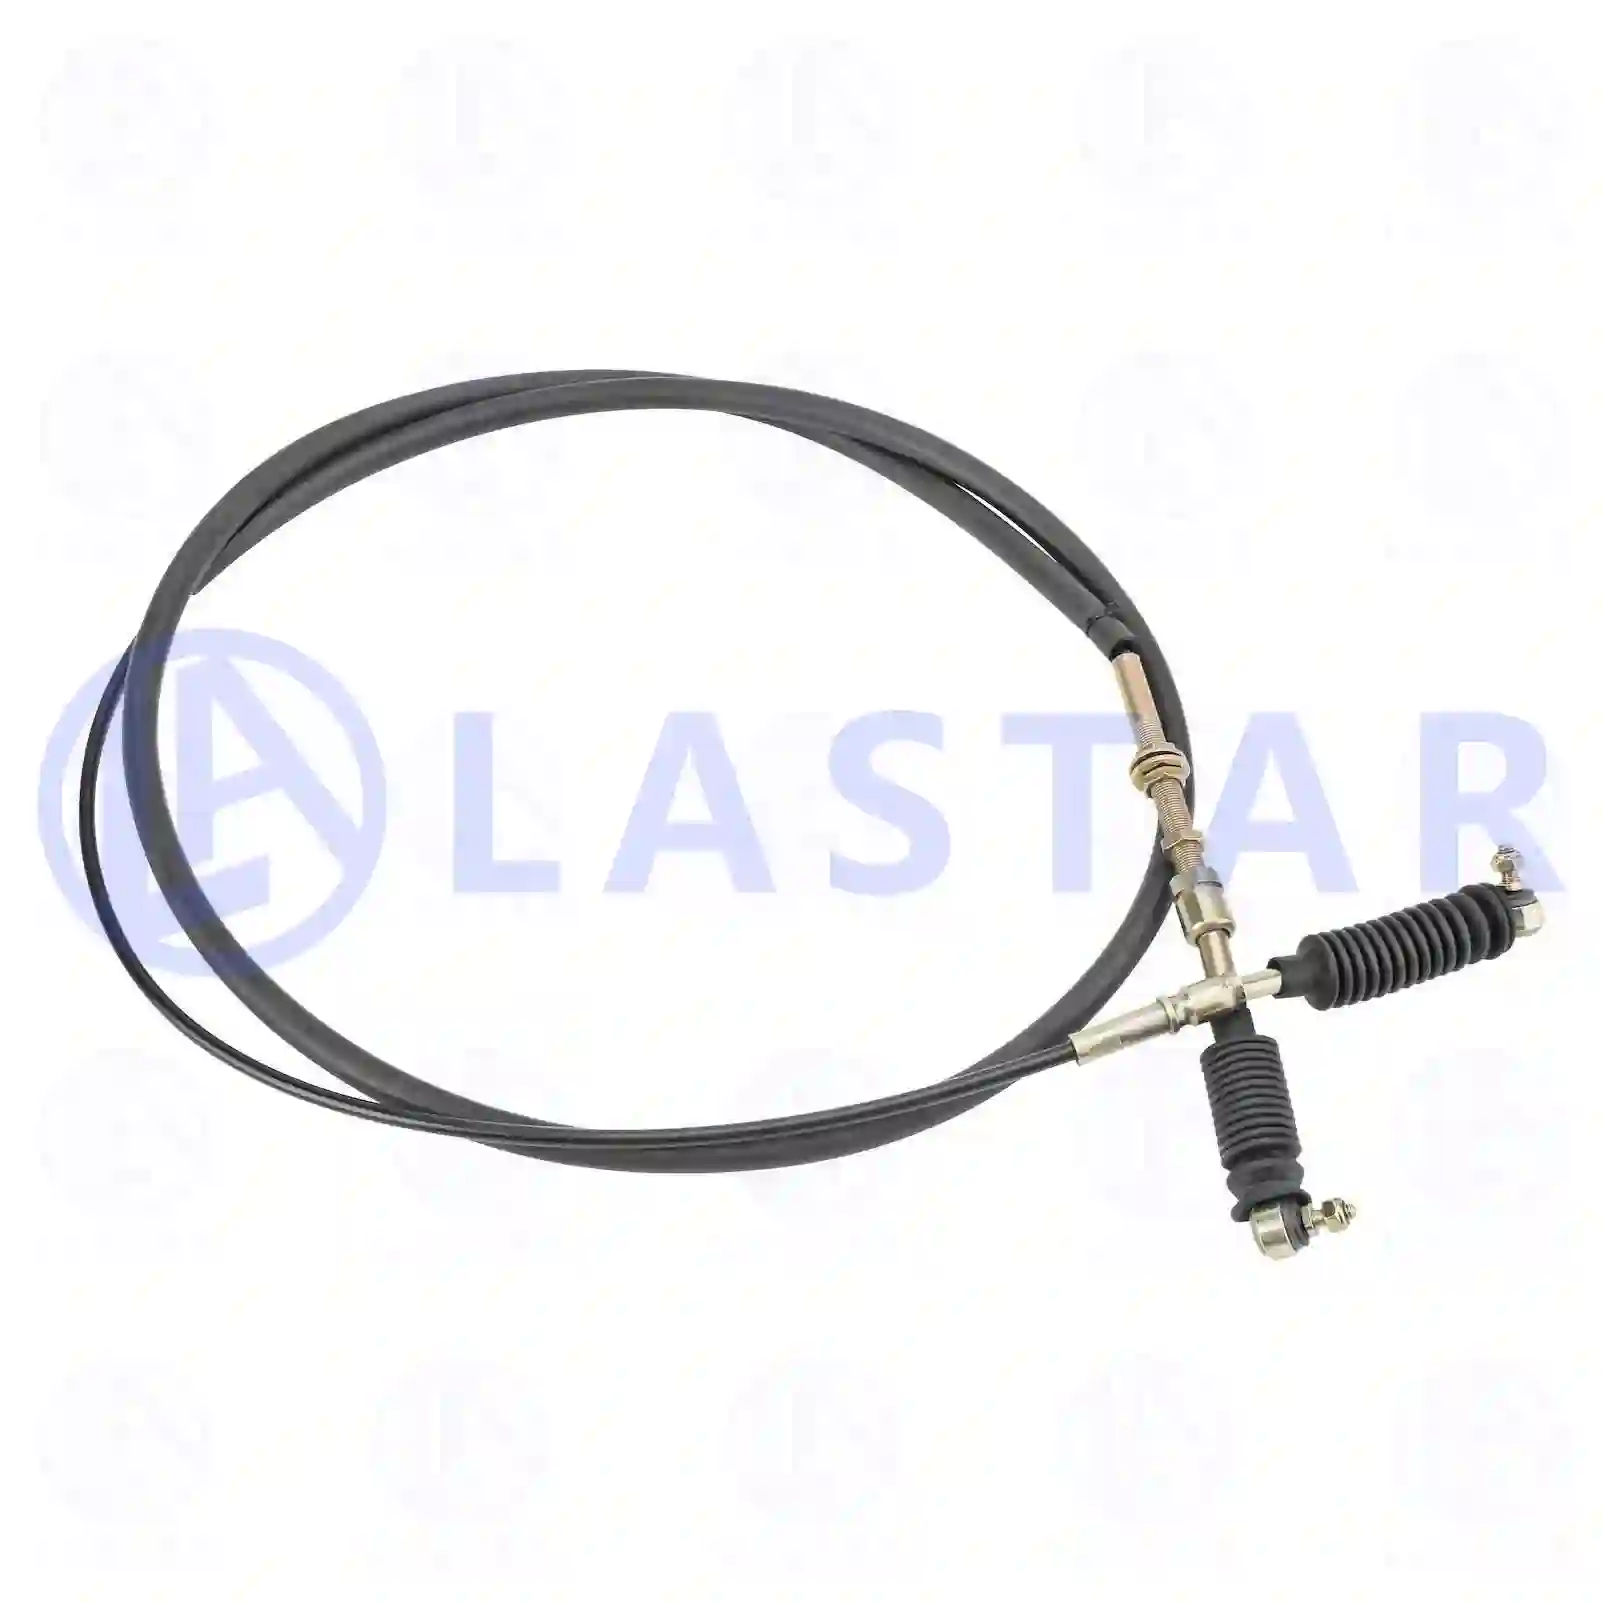 Throttle cable, 77700915, 0377981, 1244268, 377981 ||  77700915 Lastar Spare Part | Truck Spare Parts, Auotomotive Spare Parts Throttle cable, 77700915, 0377981, 1244268, 377981 ||  77700915 Lastar Spare Part | Truck Spare Parts, Auotomotive Spare Parts